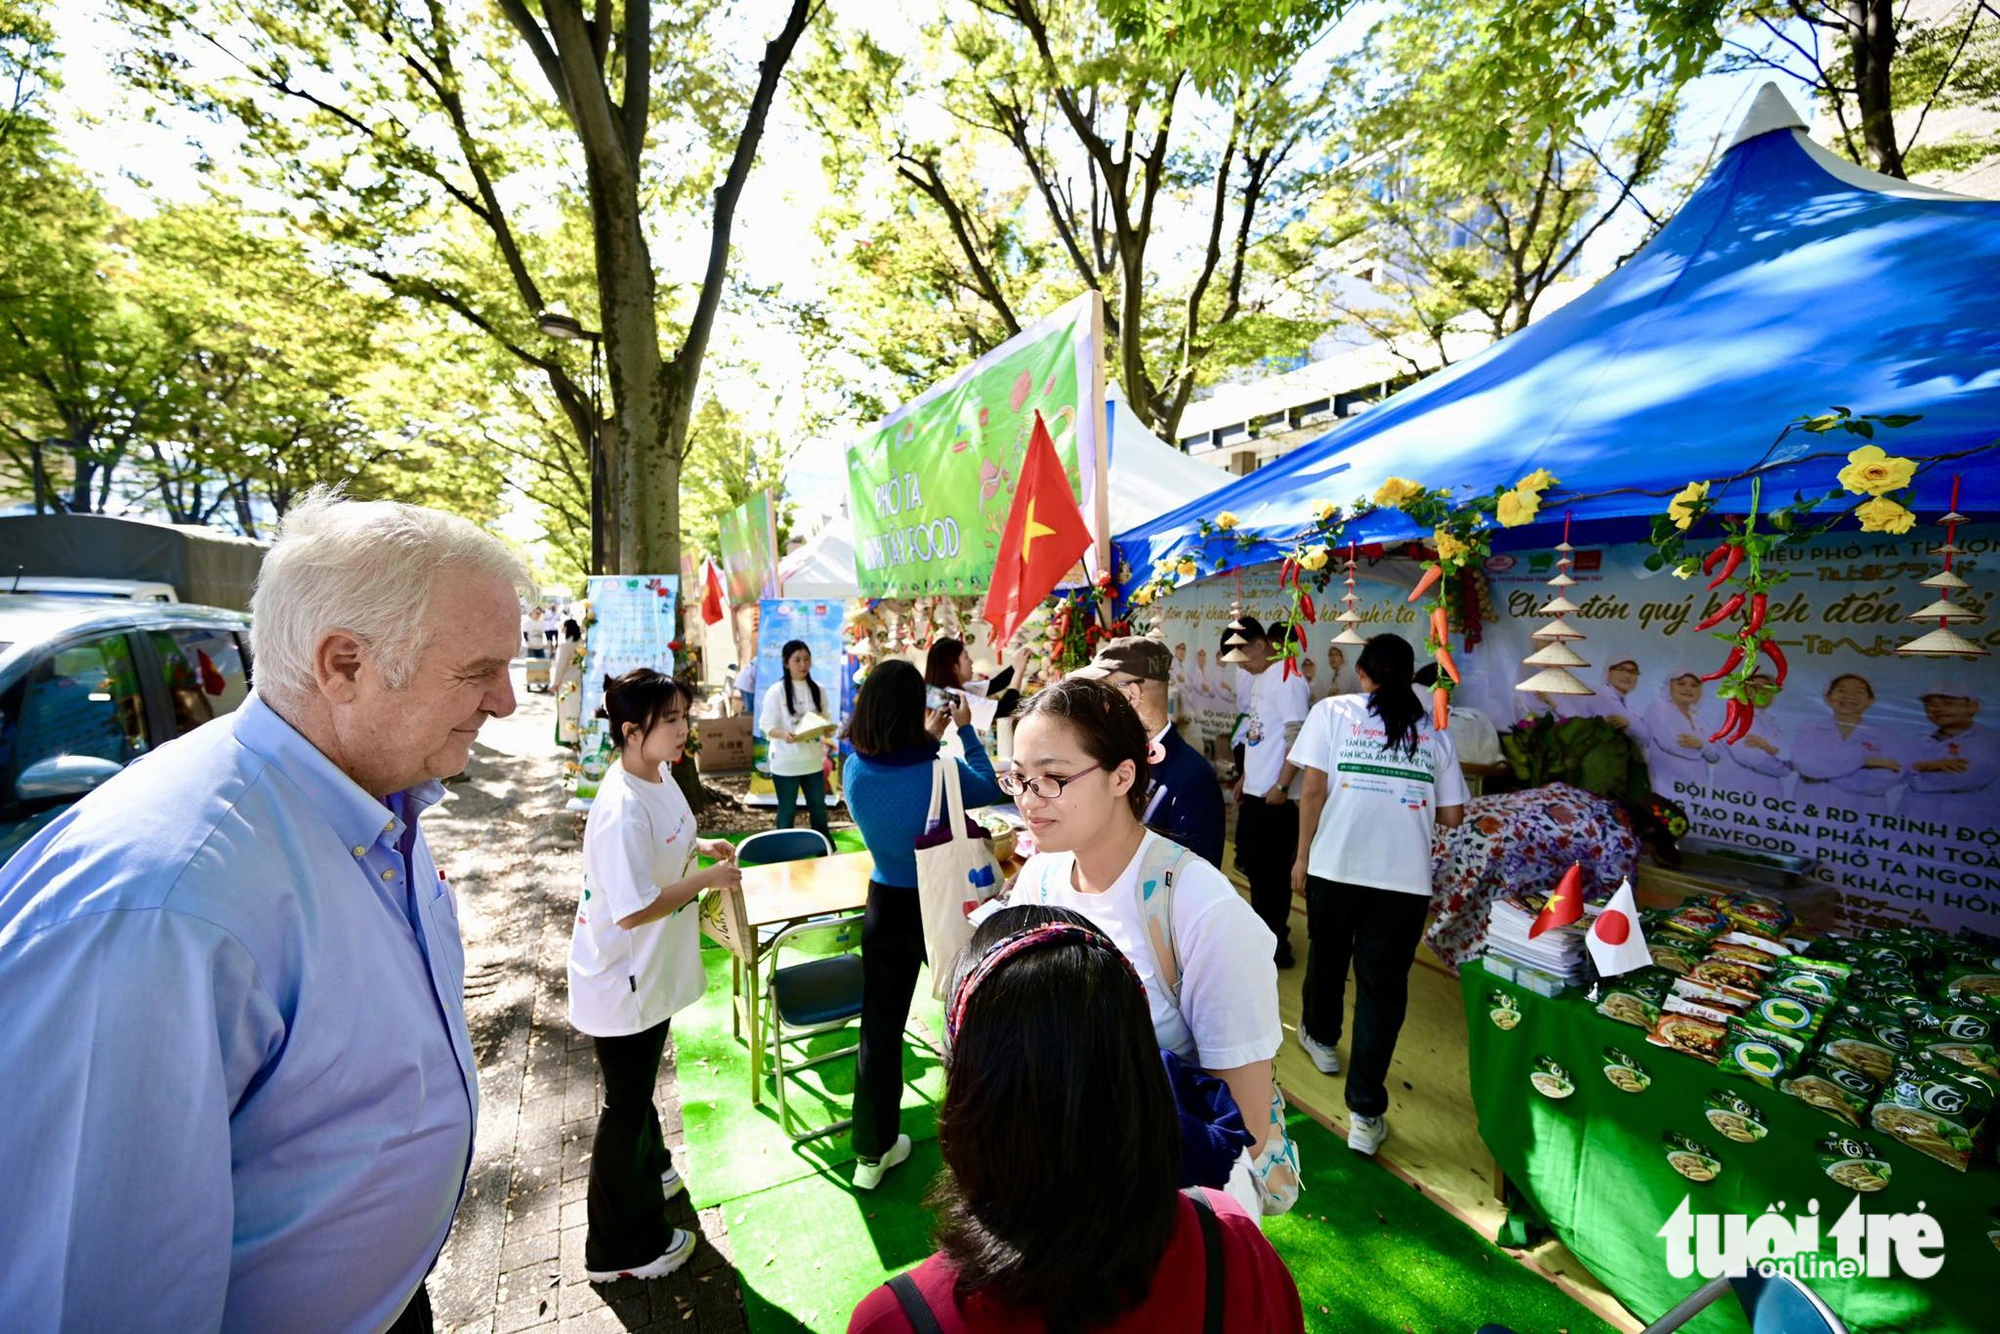 Event-goers visit a booth at the Vietnam Pho Festival 2023 at Yoyogi Park in Tokyo before it kicks off on October 7, 2023. Photo: Quang Dinh / Tuoi Tre